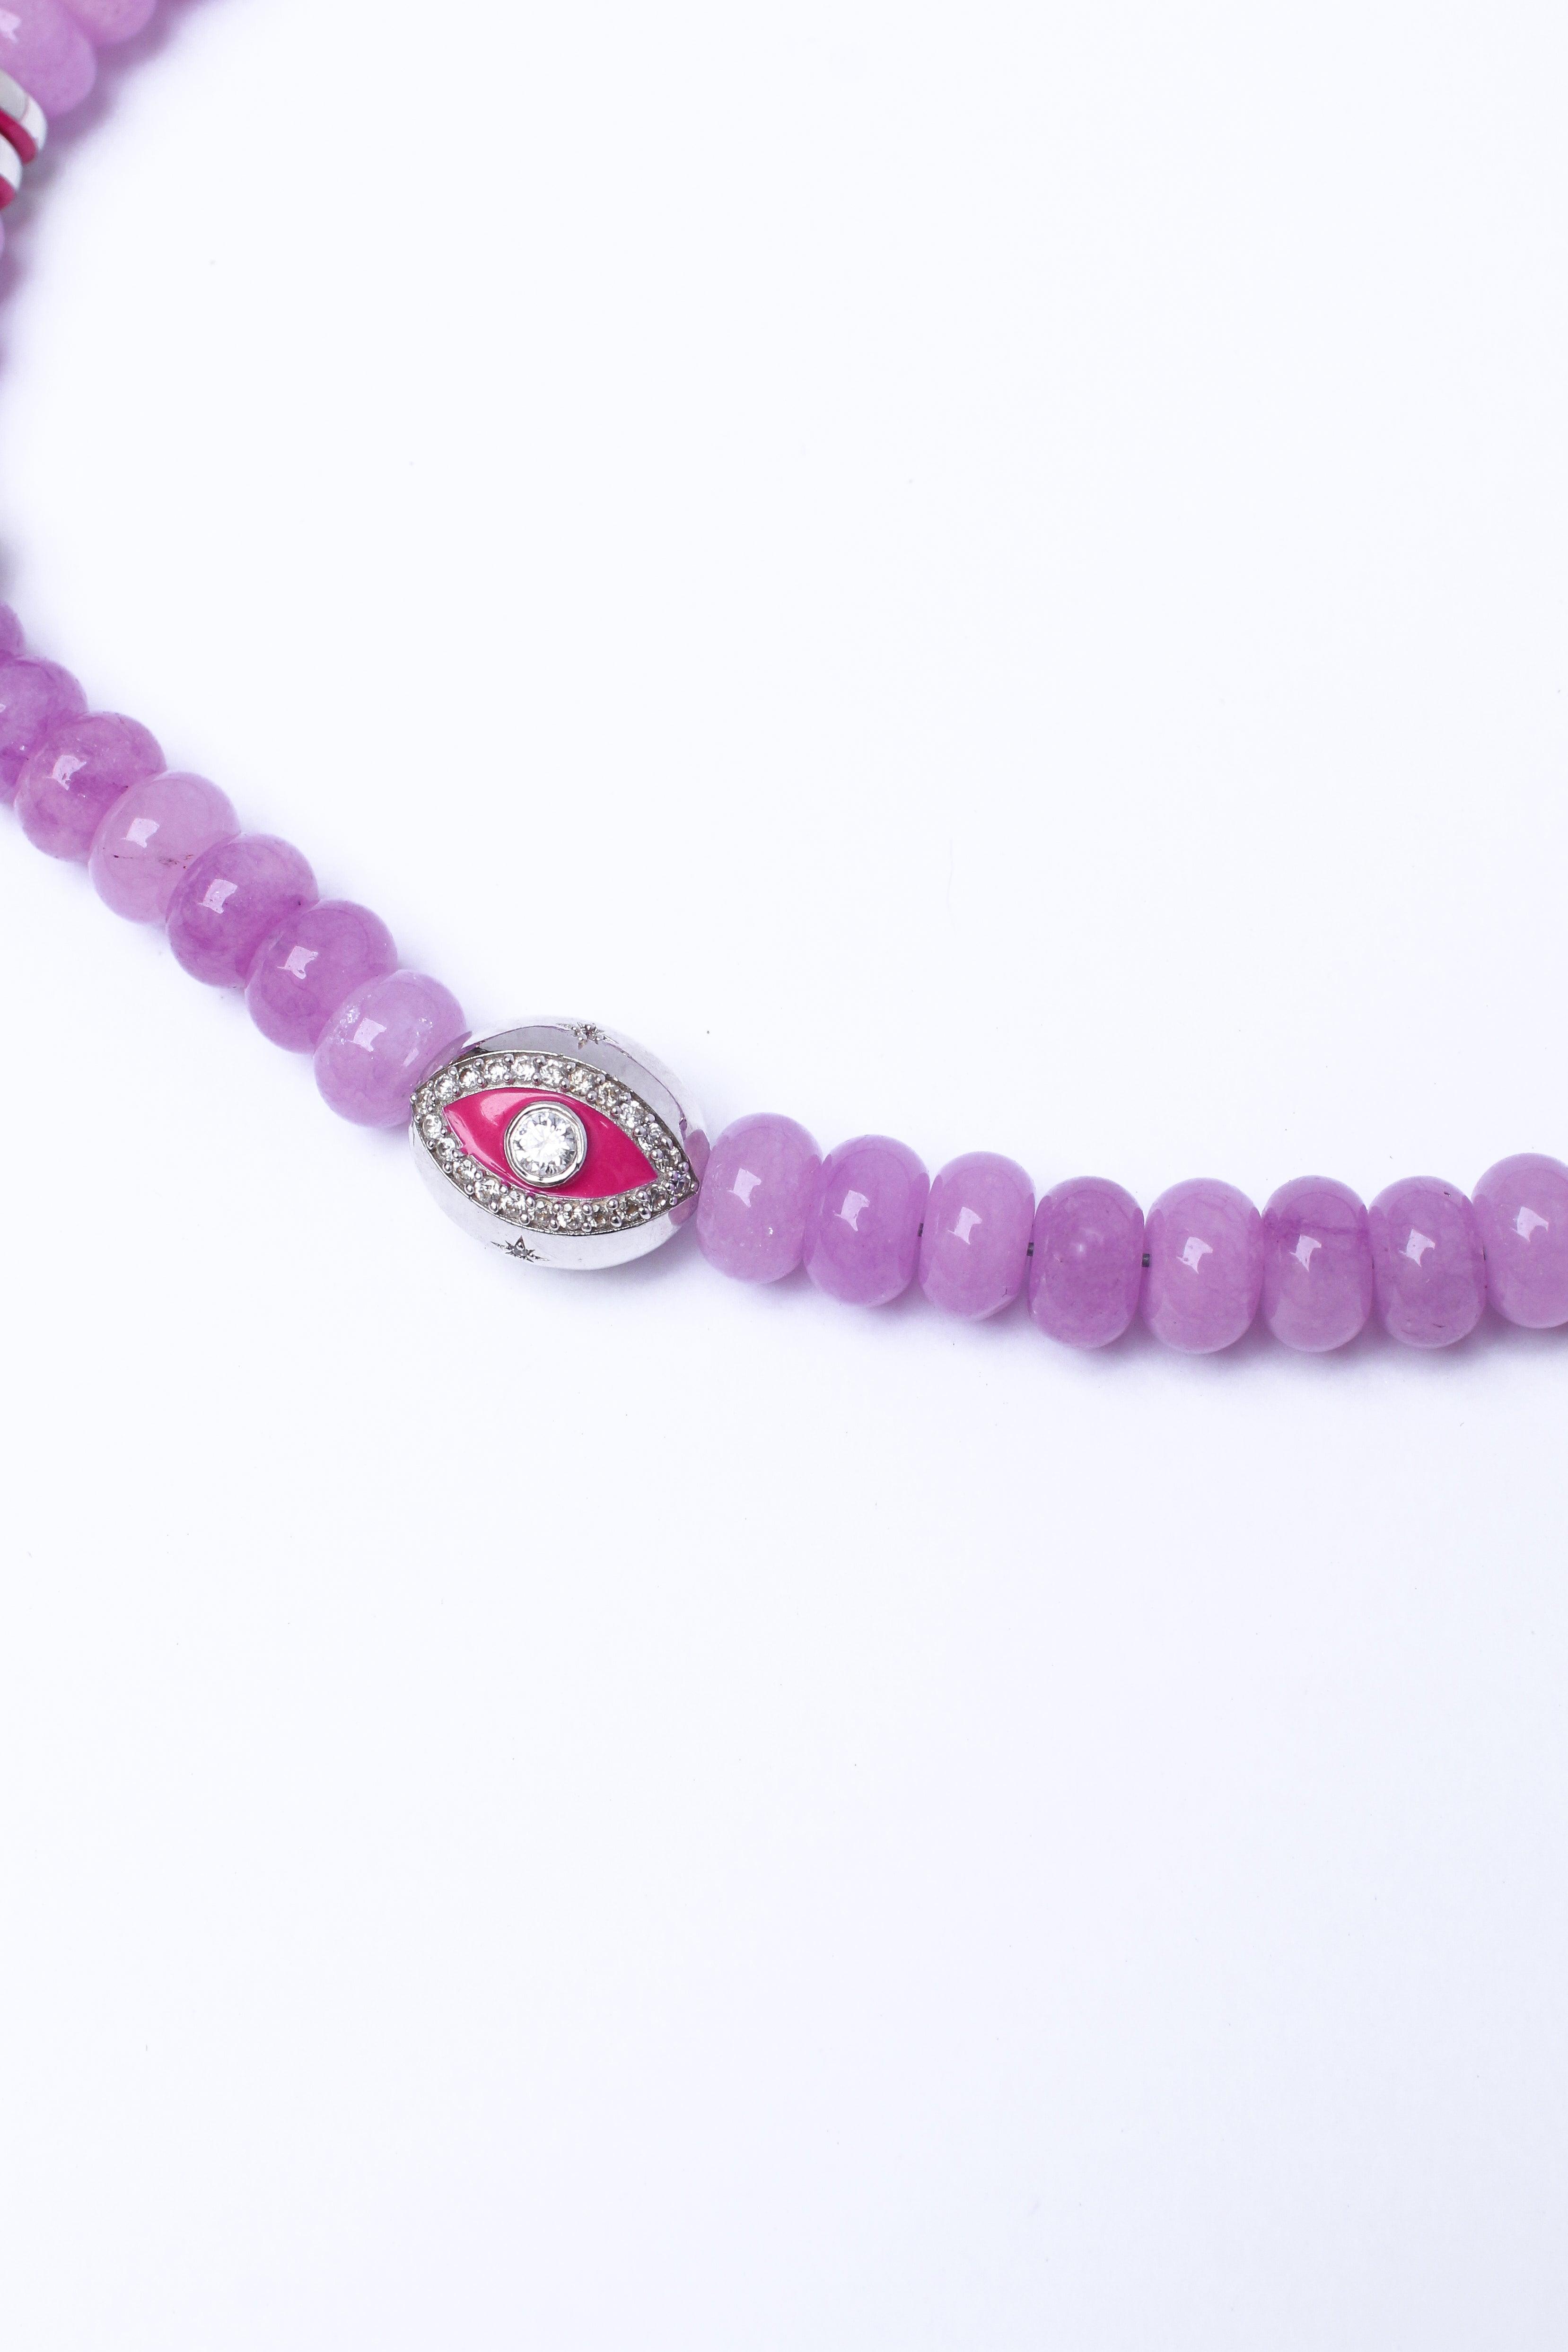 Lavender beaded phone strap, featuring a silver evil eye accent charm, on a white background